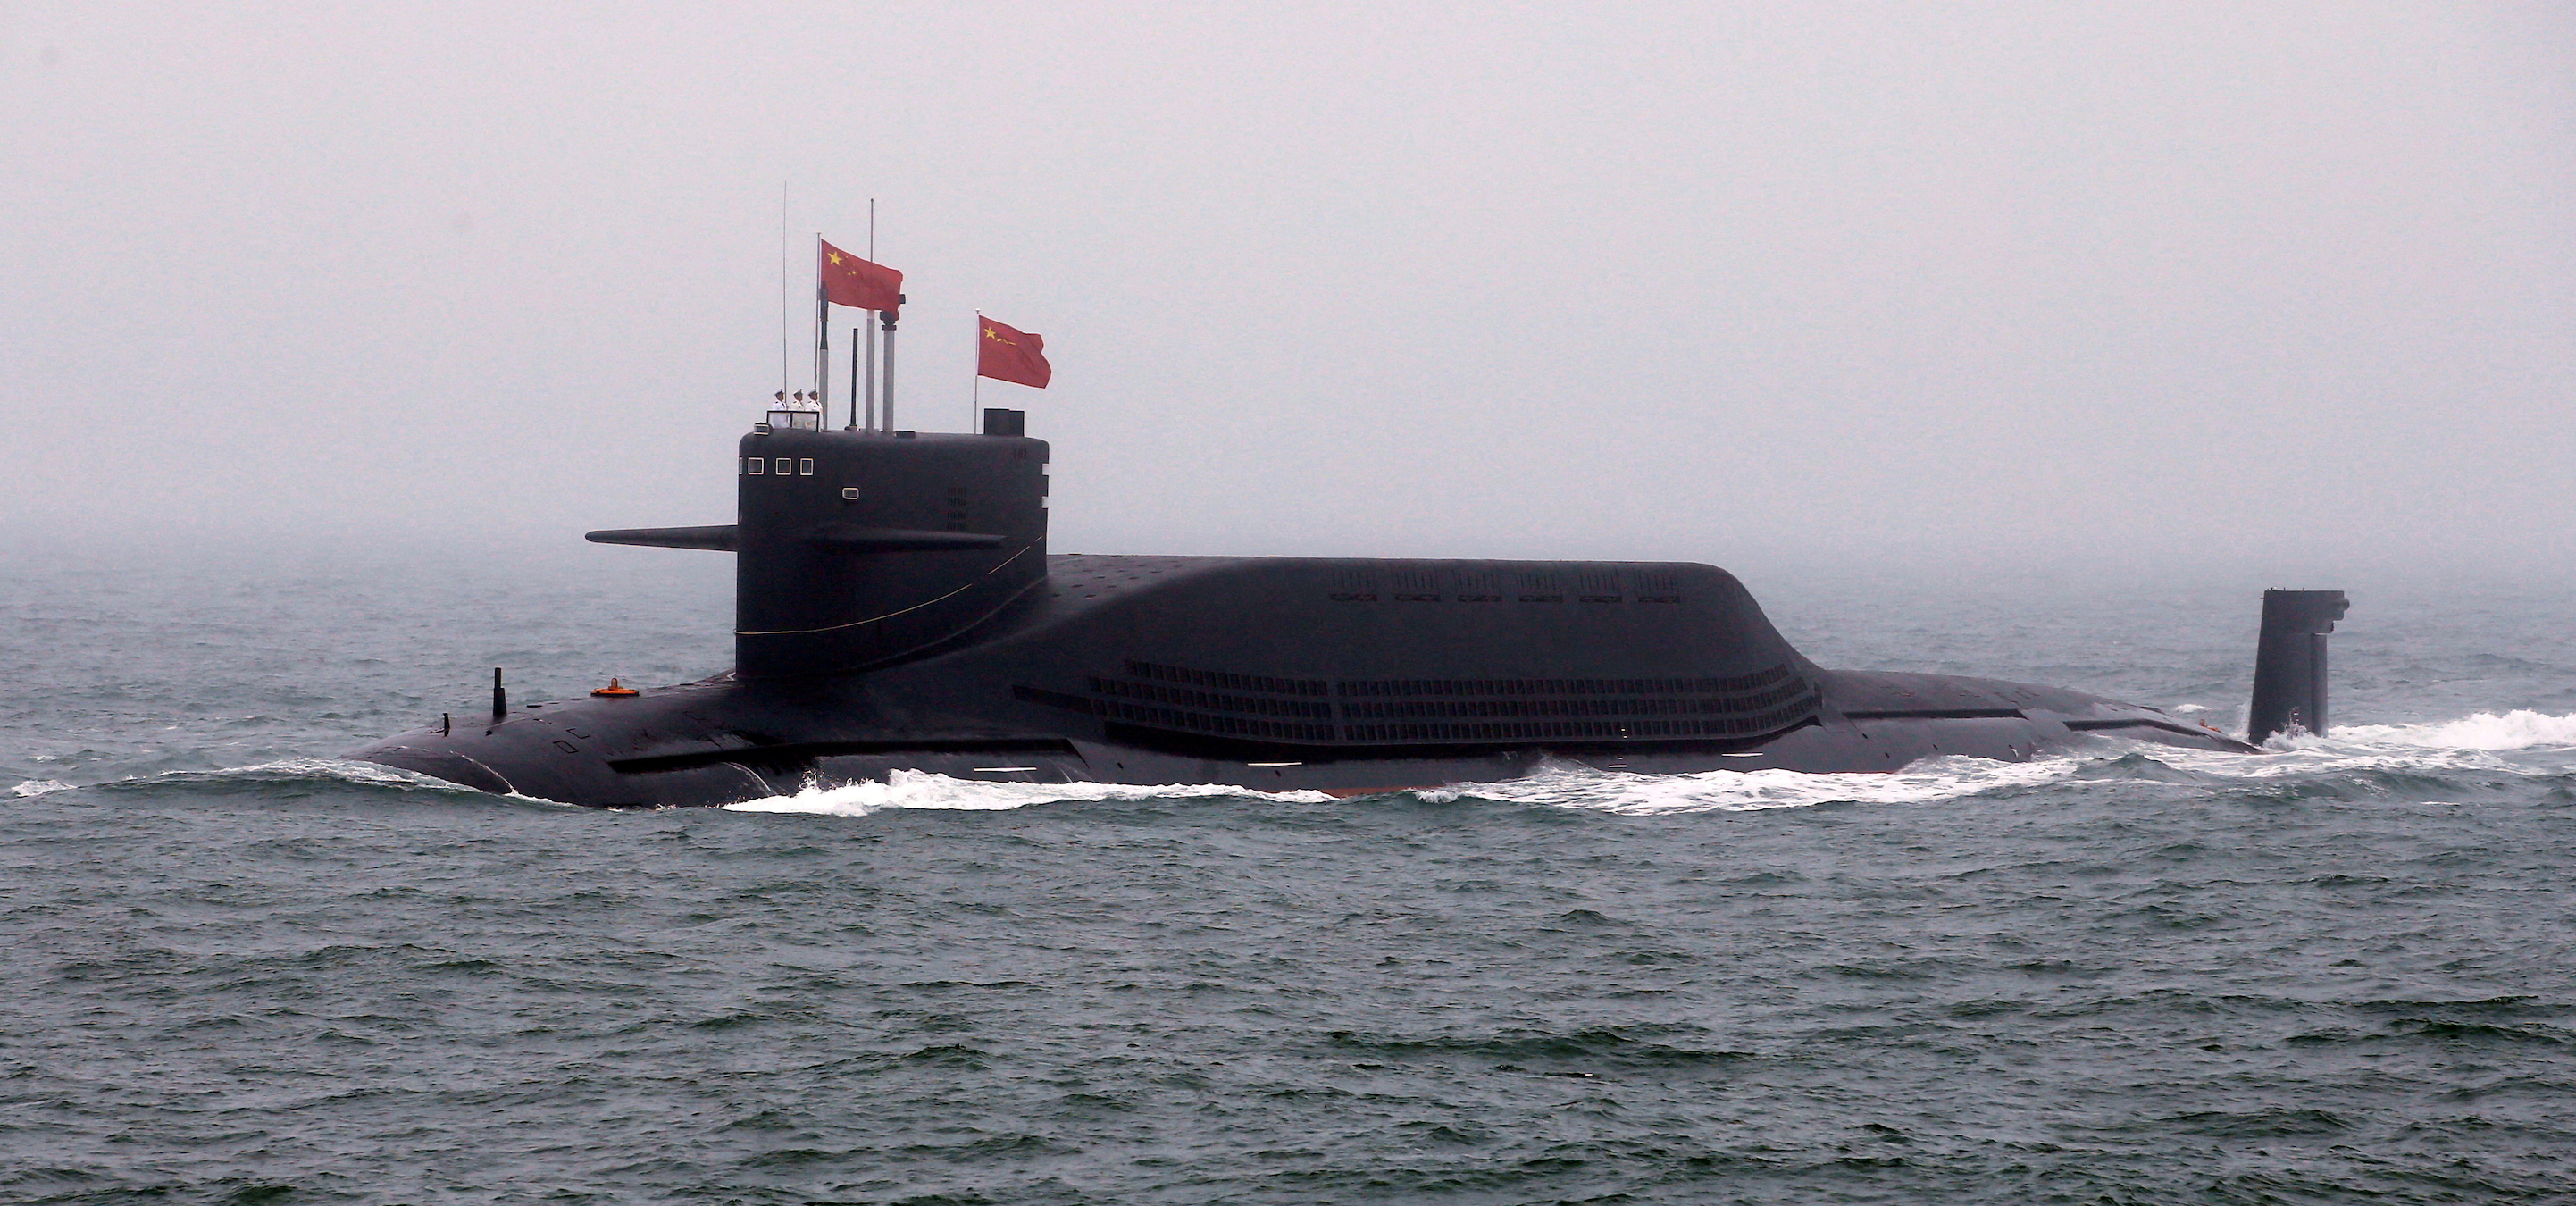 China near “breakthroughs” with nuclear-armed submarines, report says